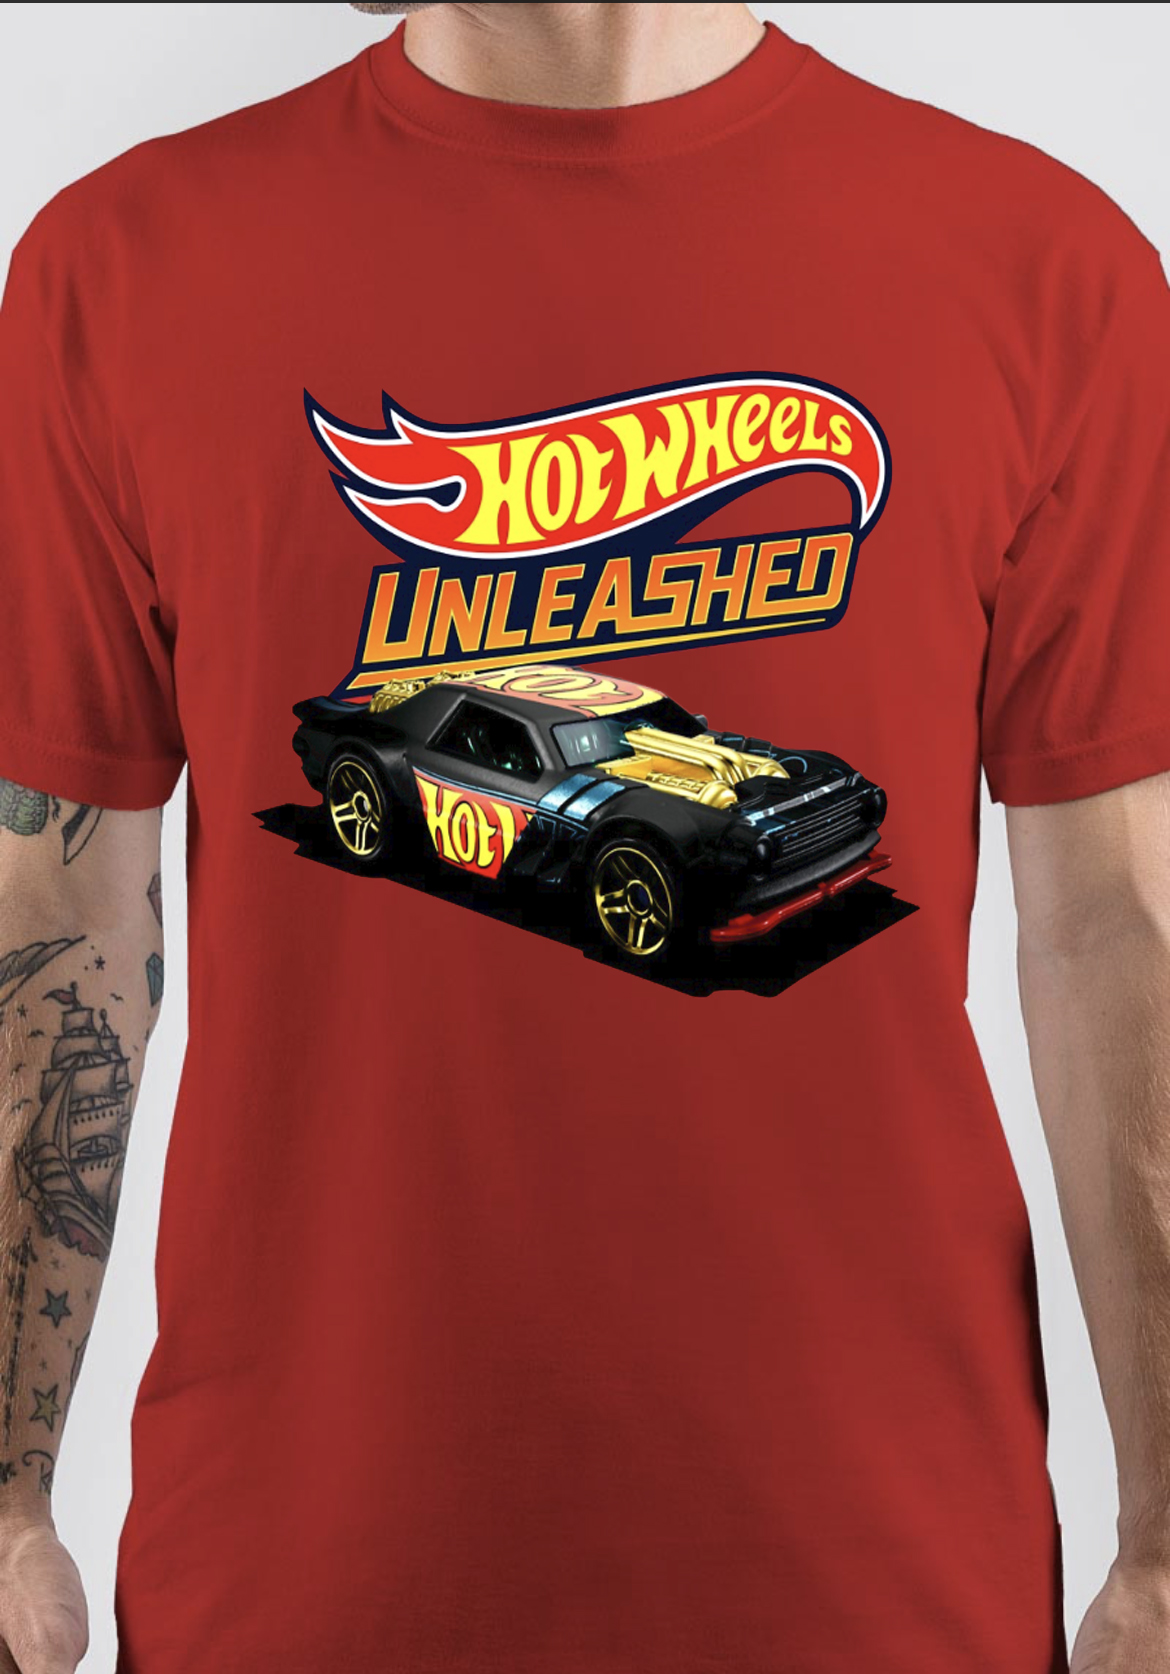 Hot Wheels Unleashed T-Shirt And Merchandise